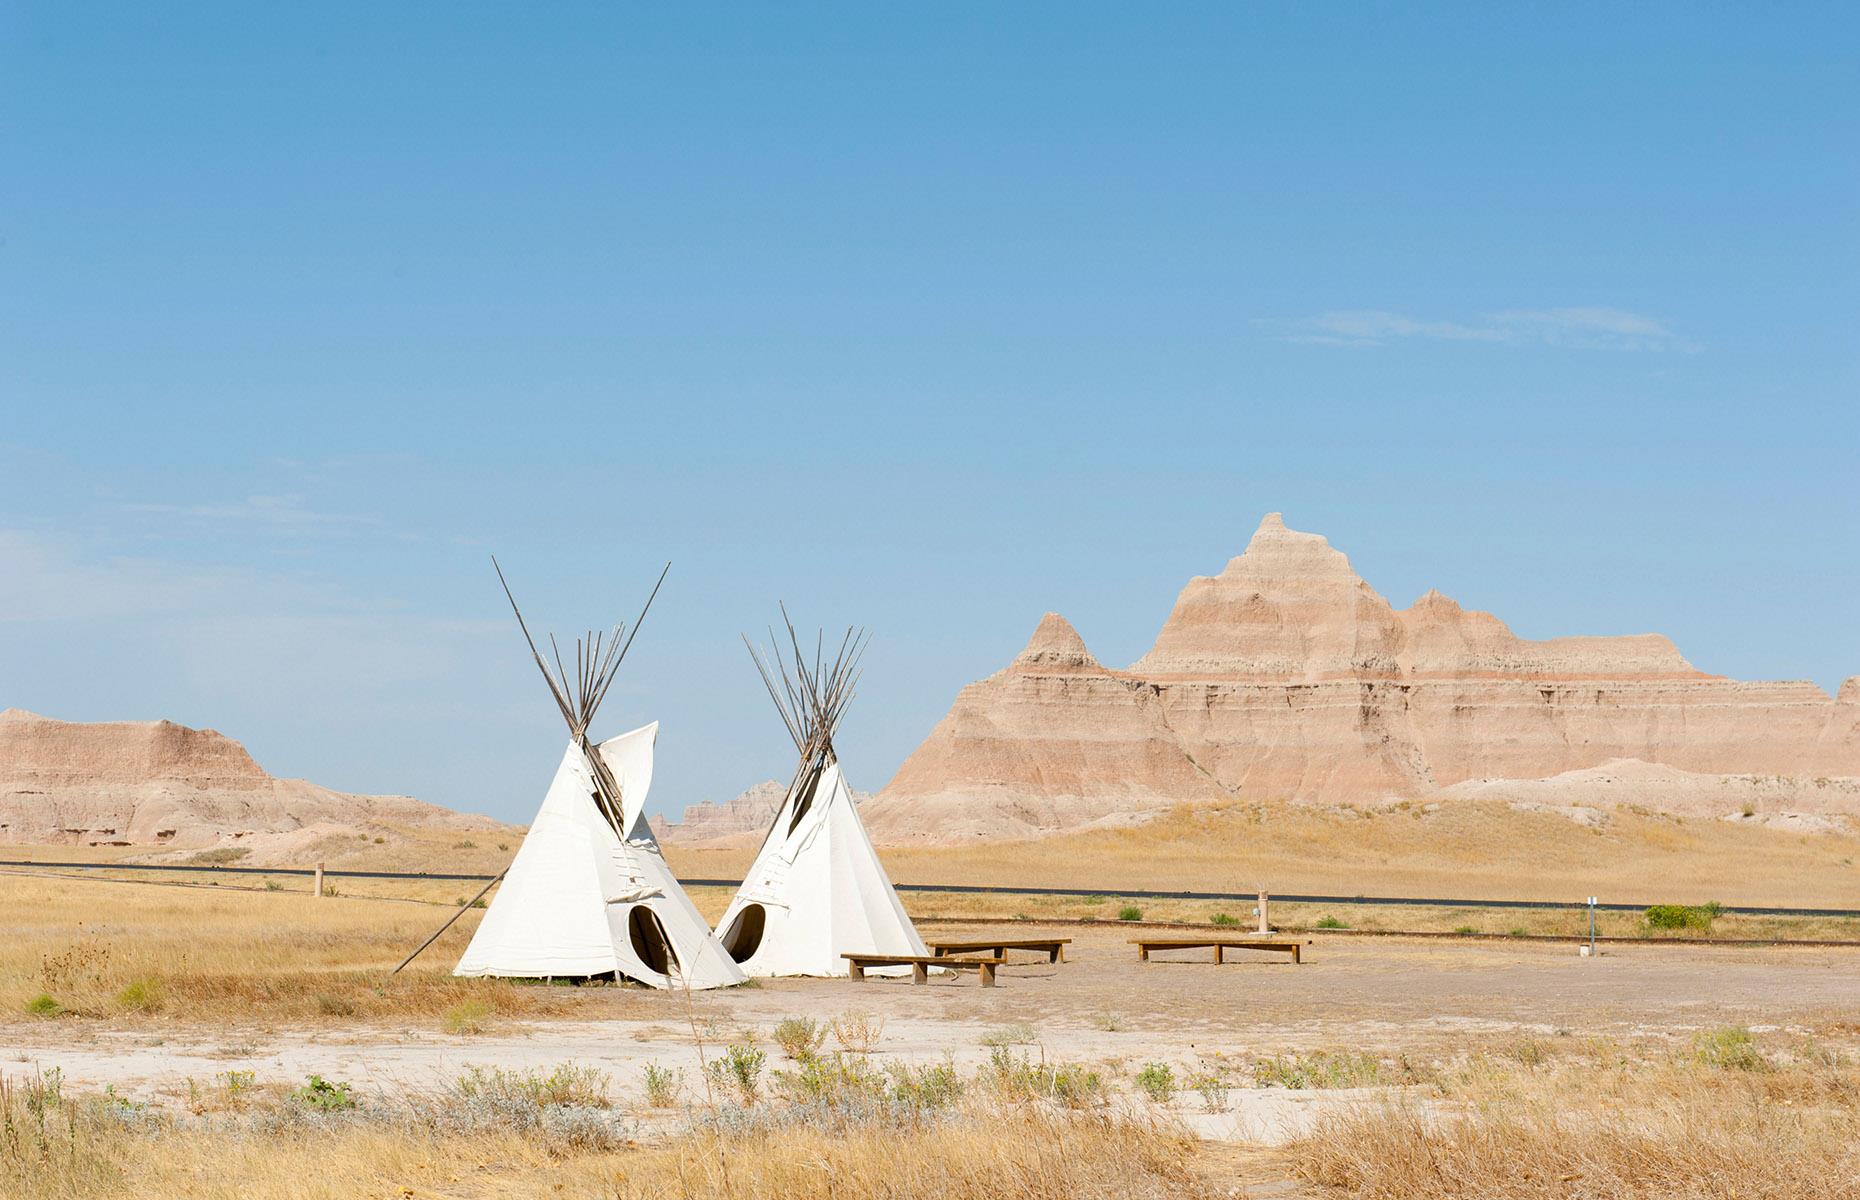 The village showcases the Lakota way of life from the late 1800s up until the 1960s through connection to their lands, tipi displays and accurate period pieces. Perhaps most importantly, the Lakota stories are told by Lakota people, who share Indigenous knowledge about taking care of Mother Earth.